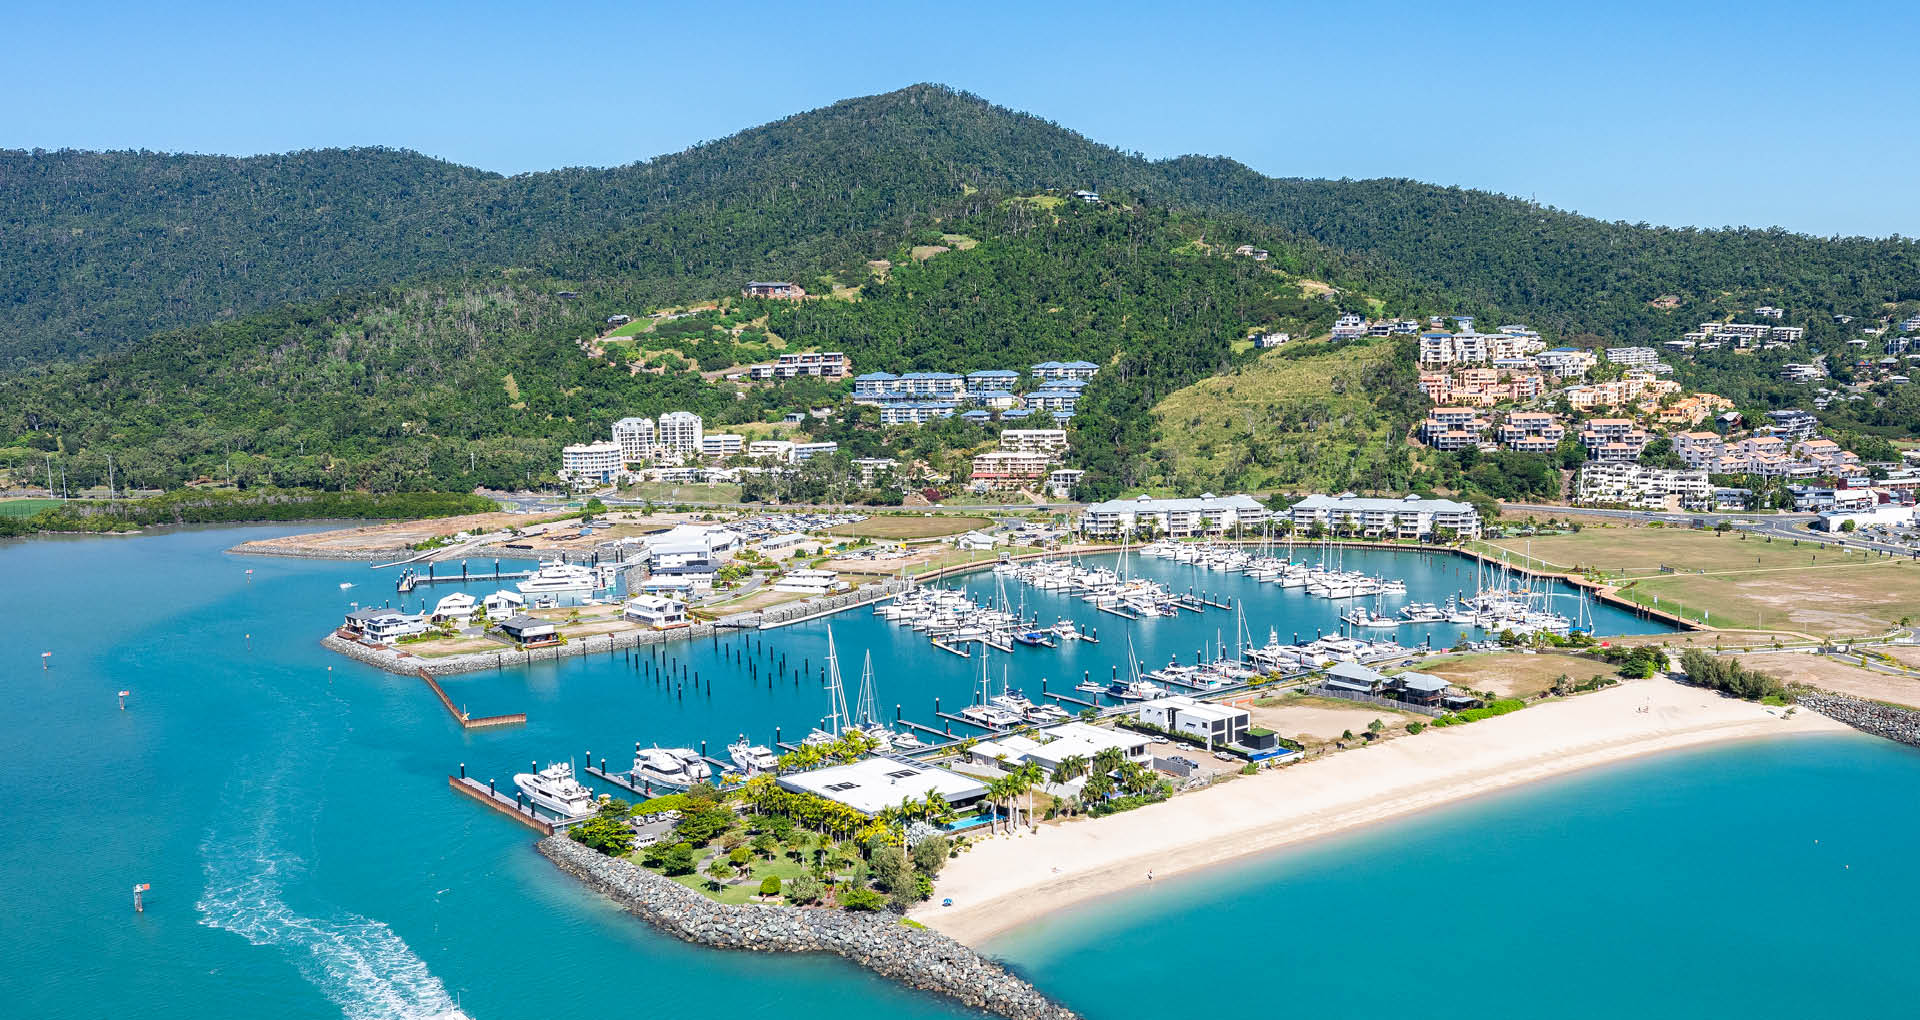 PORT OF AIRLIE AIRLIE BEACH 
CONCEPTUAL DESIGN